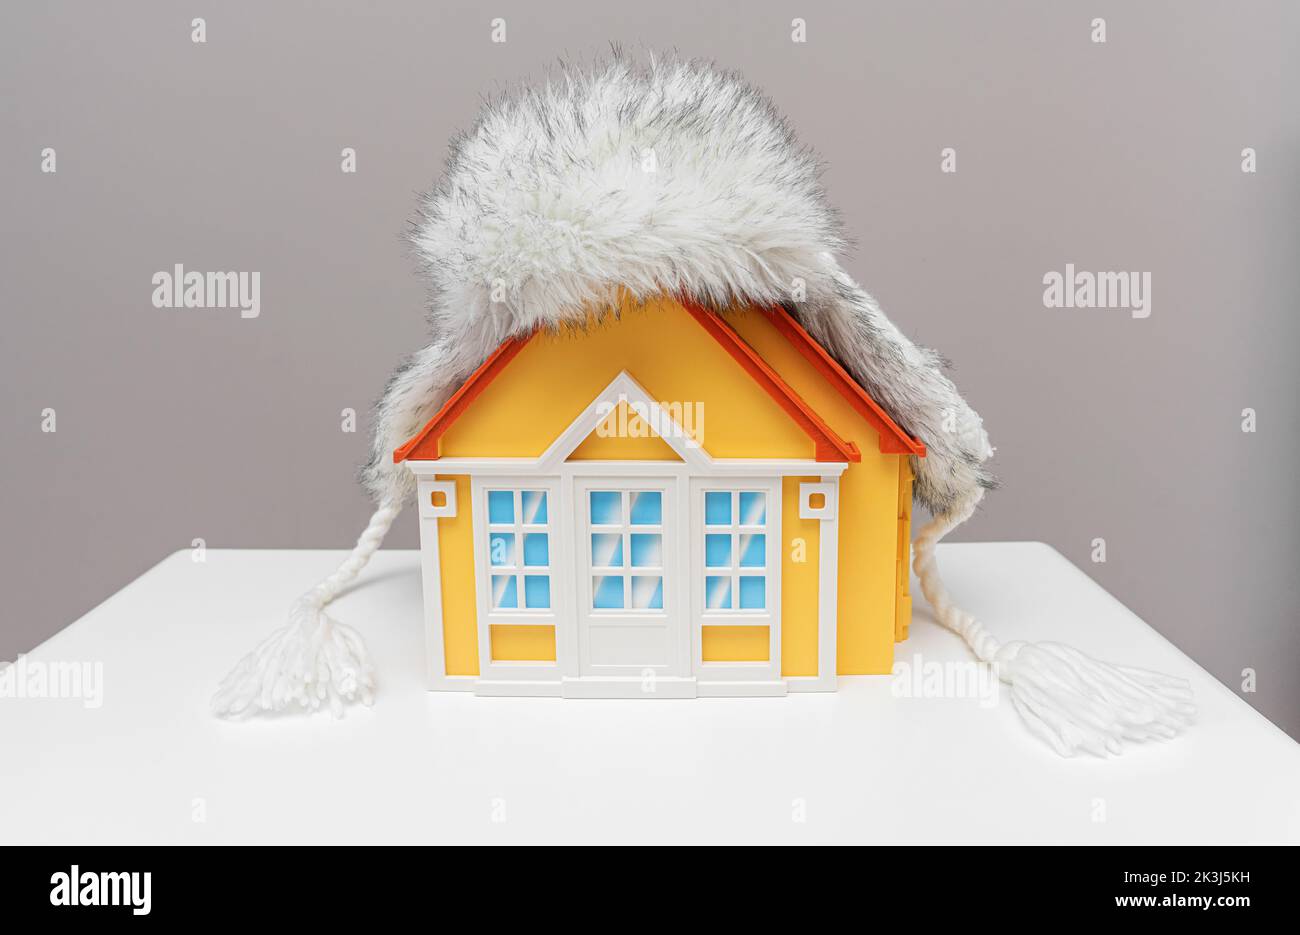 Warm hat with earflaps on the roof of the house. Stock Photo